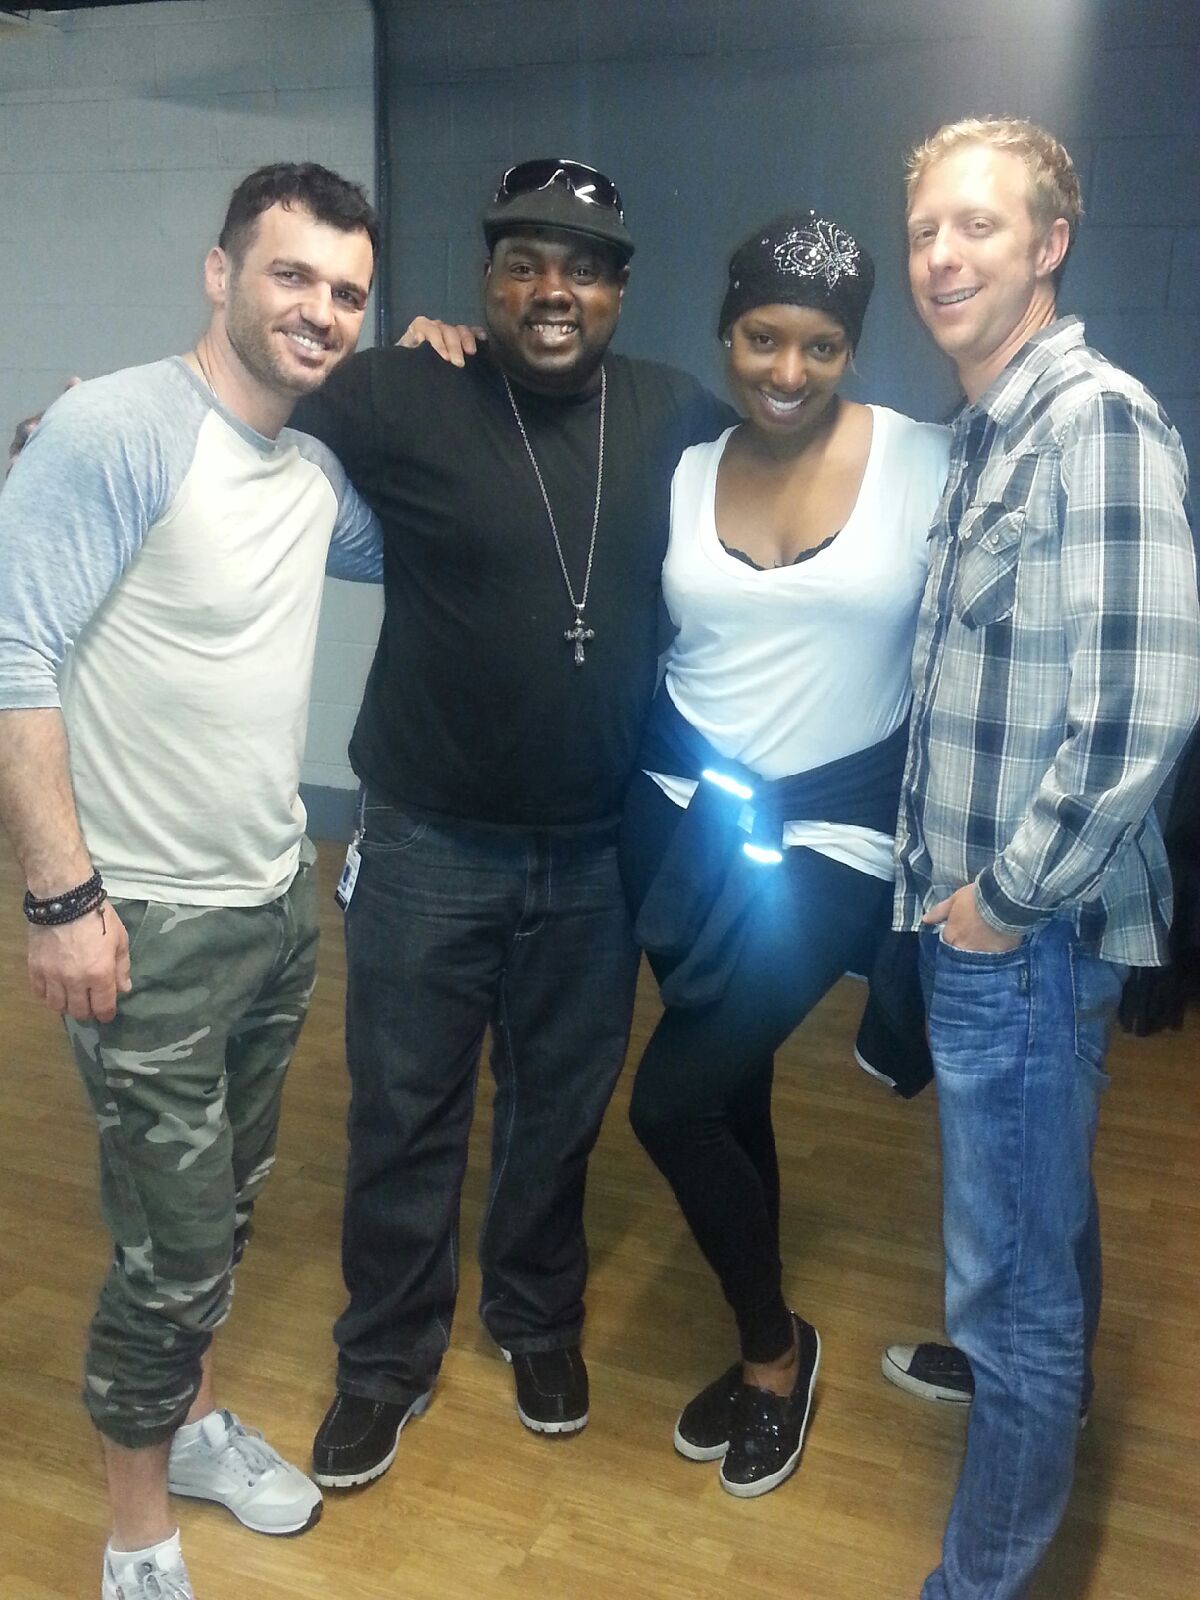 Working with NeNe Leakes, Tony Dovolani Dancing With The Stars